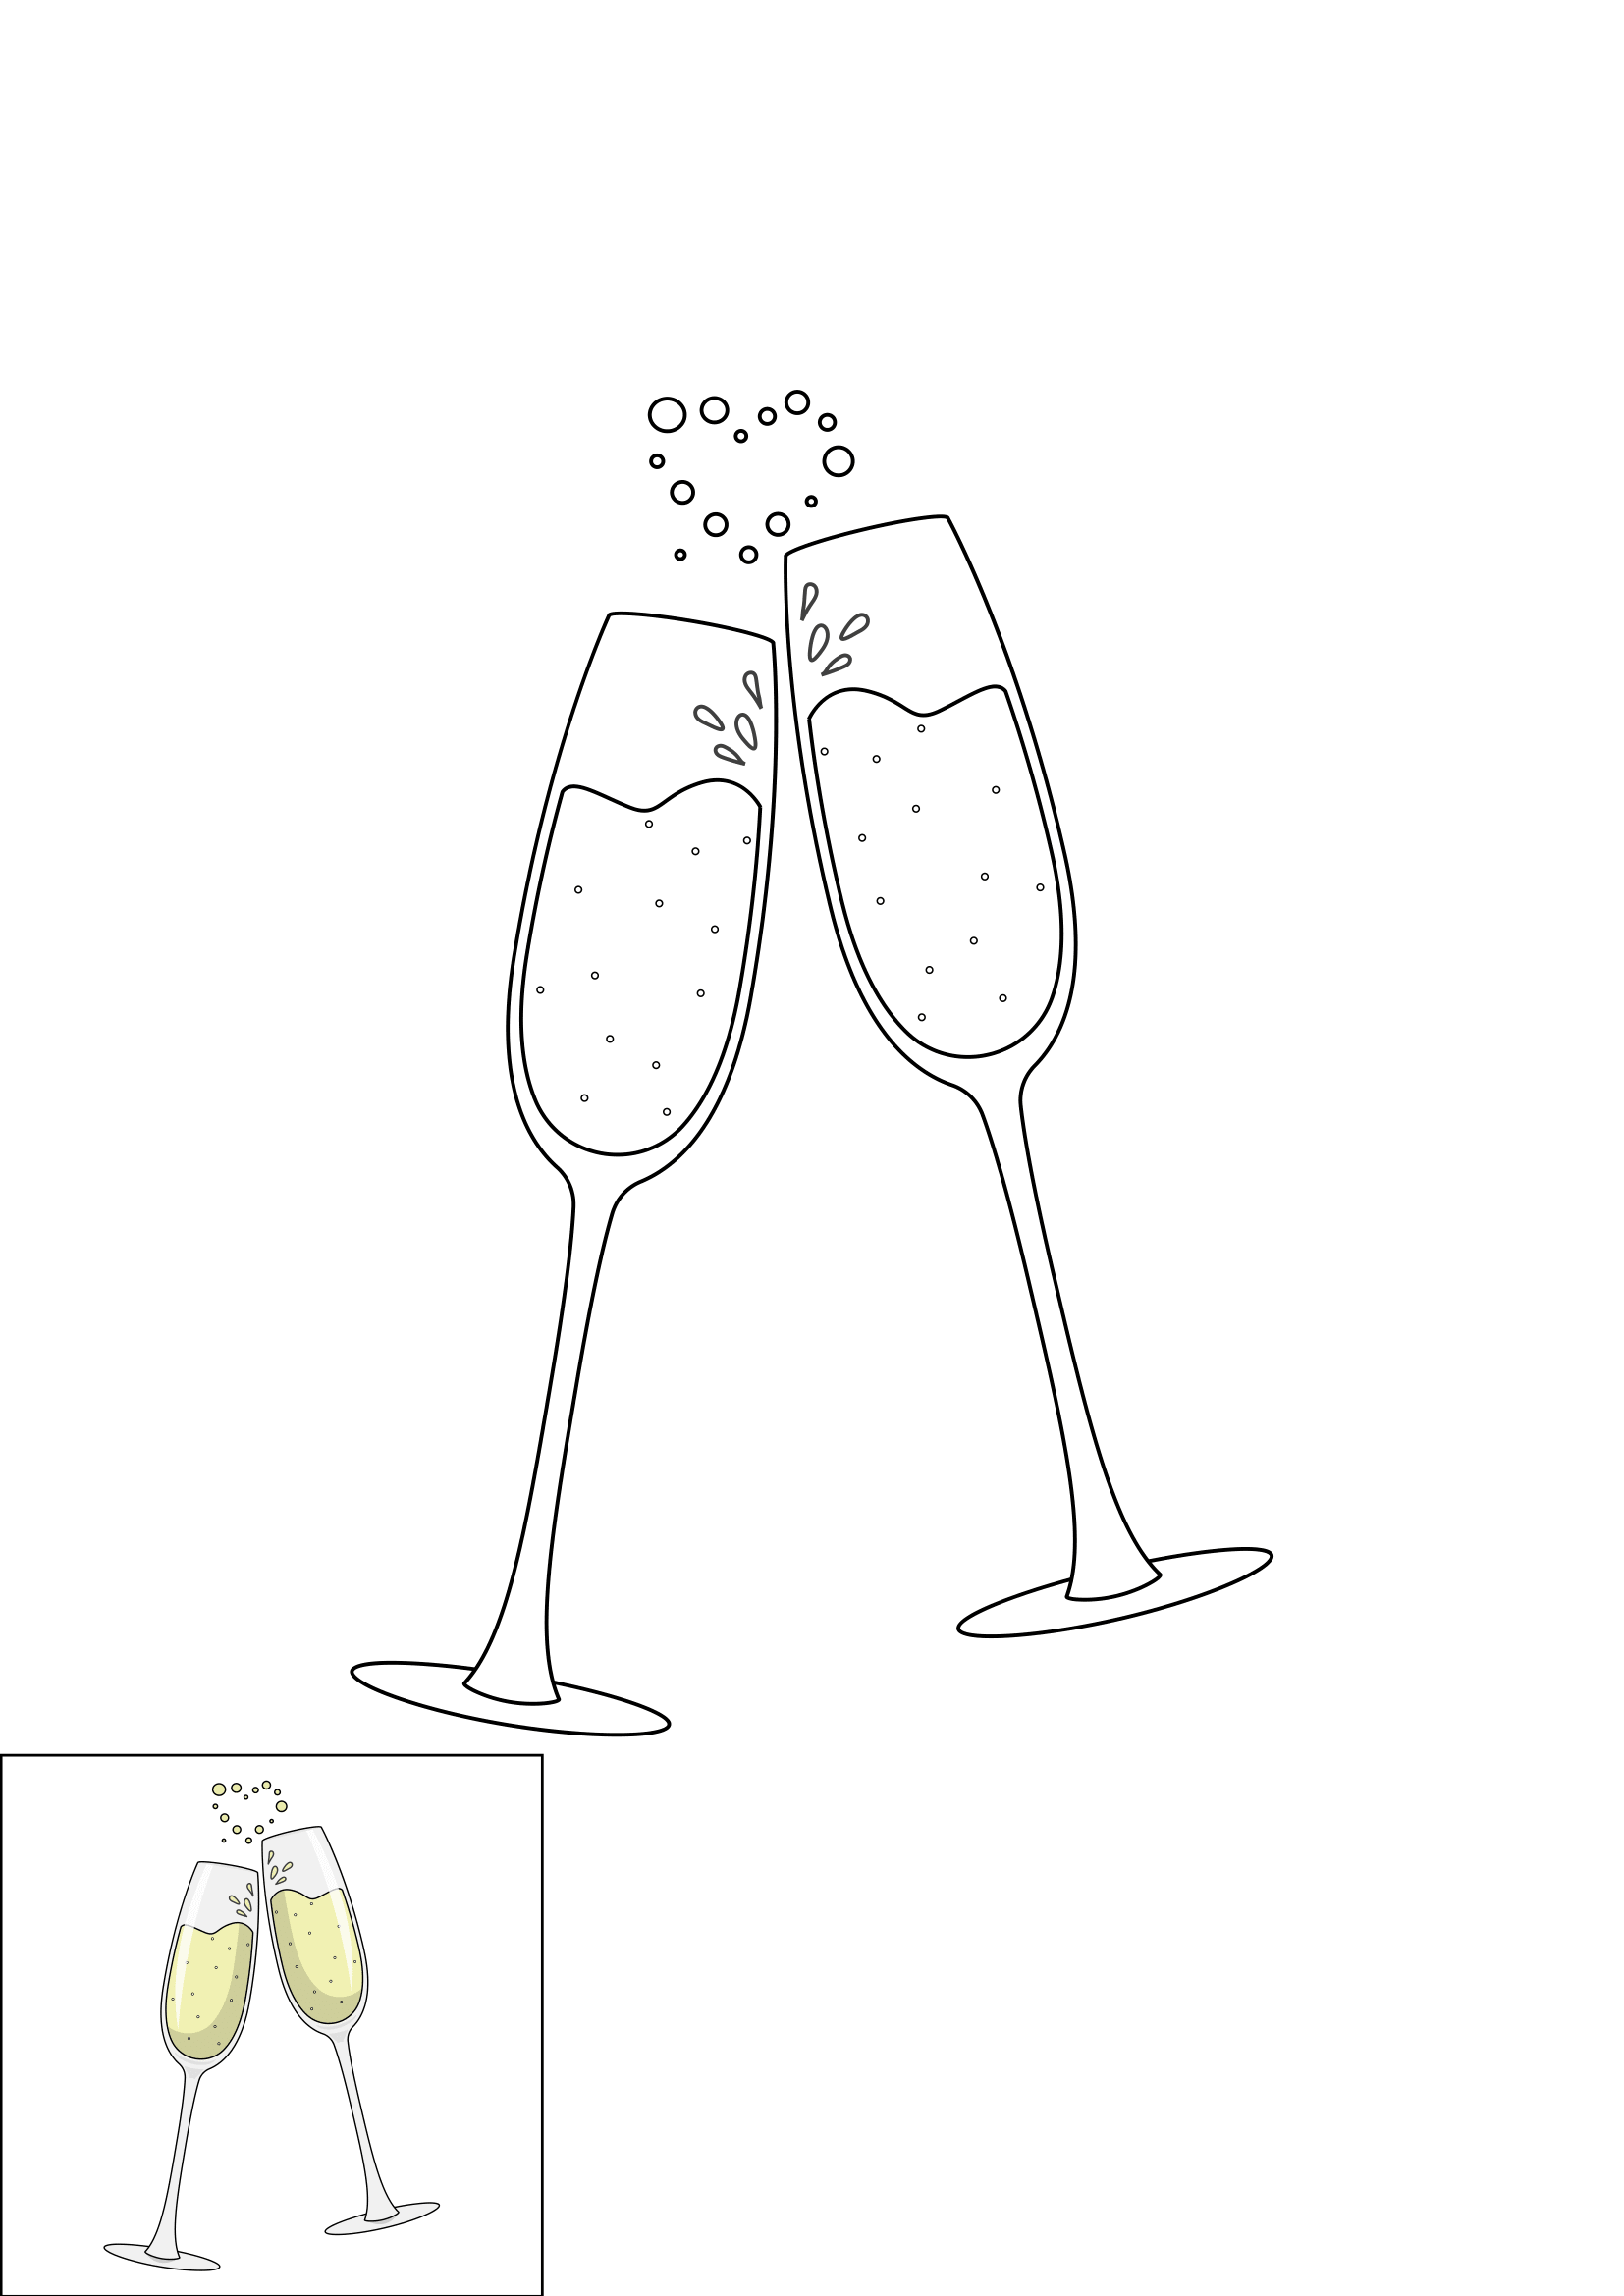 How to Draw A Champagne Glass Step by Step Printable Color